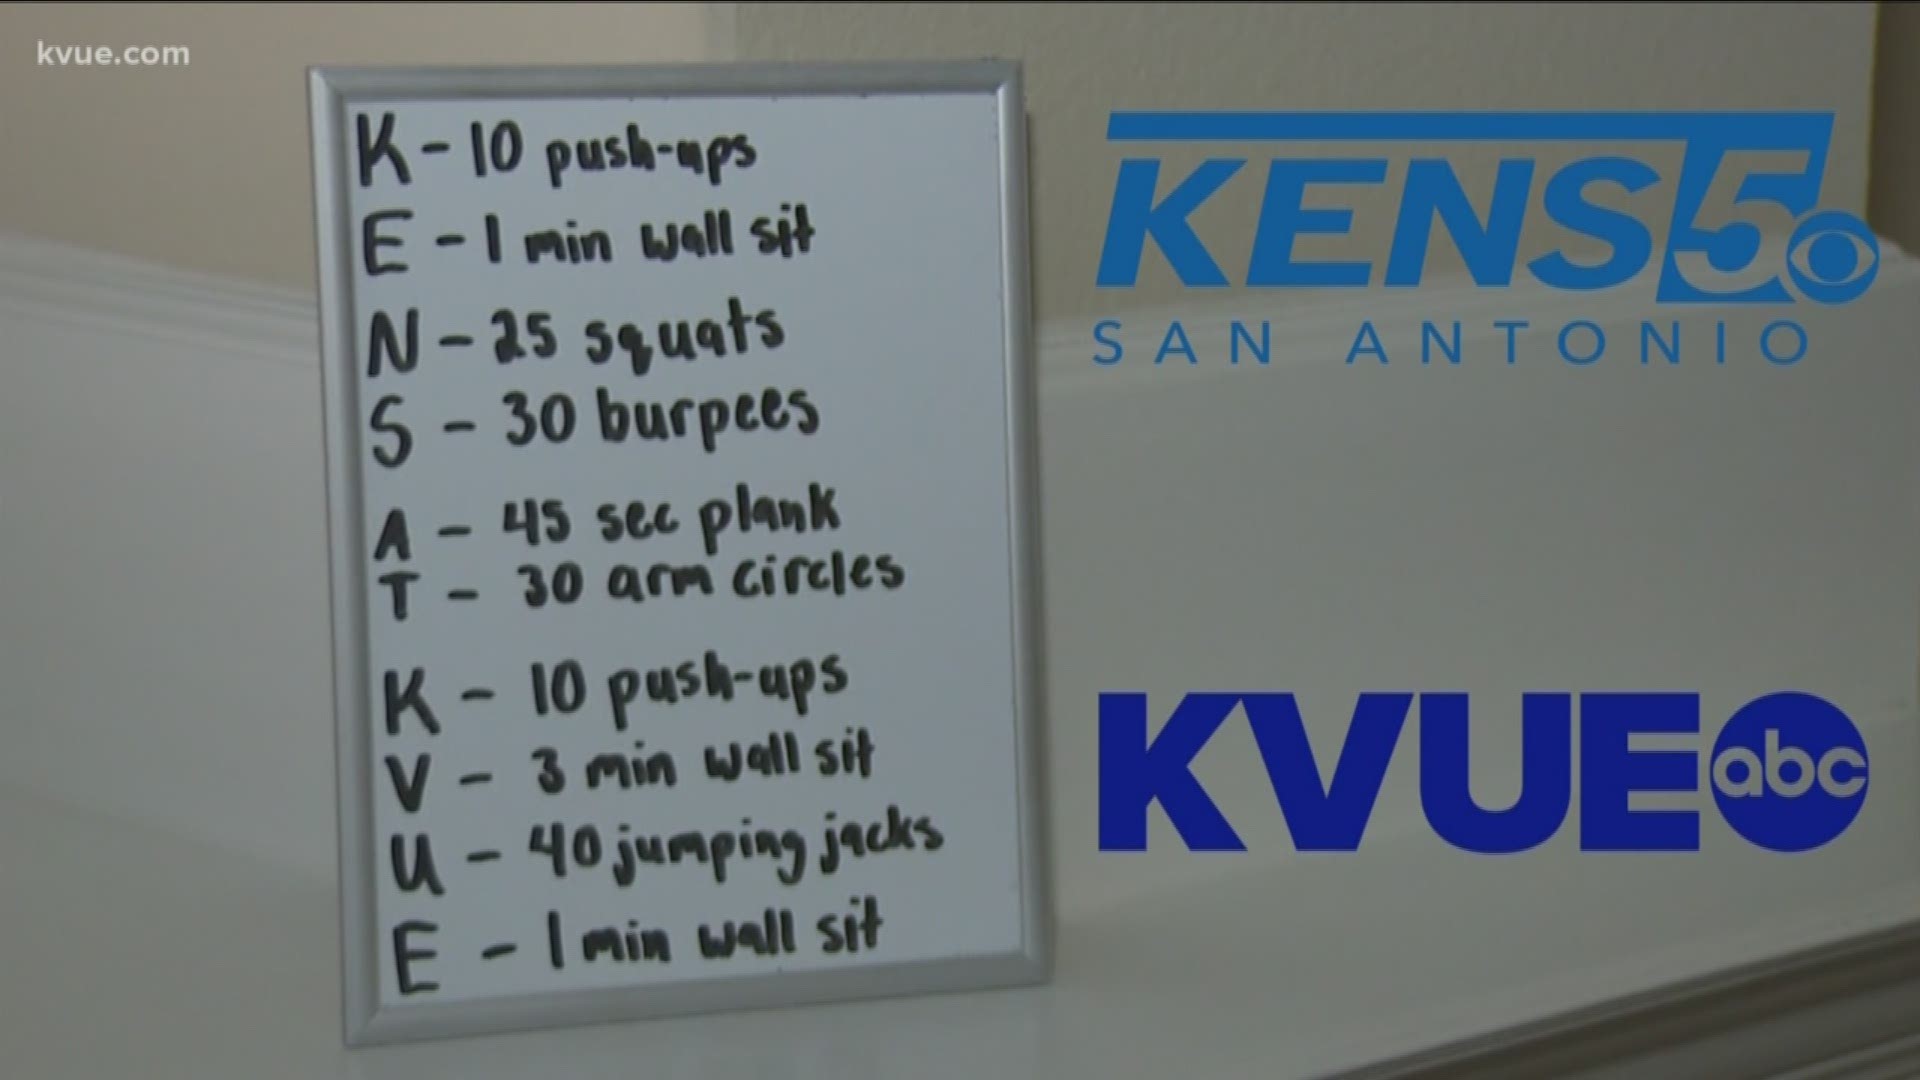 Evan Closky from KVUE's San Antonio sister station, KENS 5, challenged Jake on Twitter to a Shelter in Shape workout.